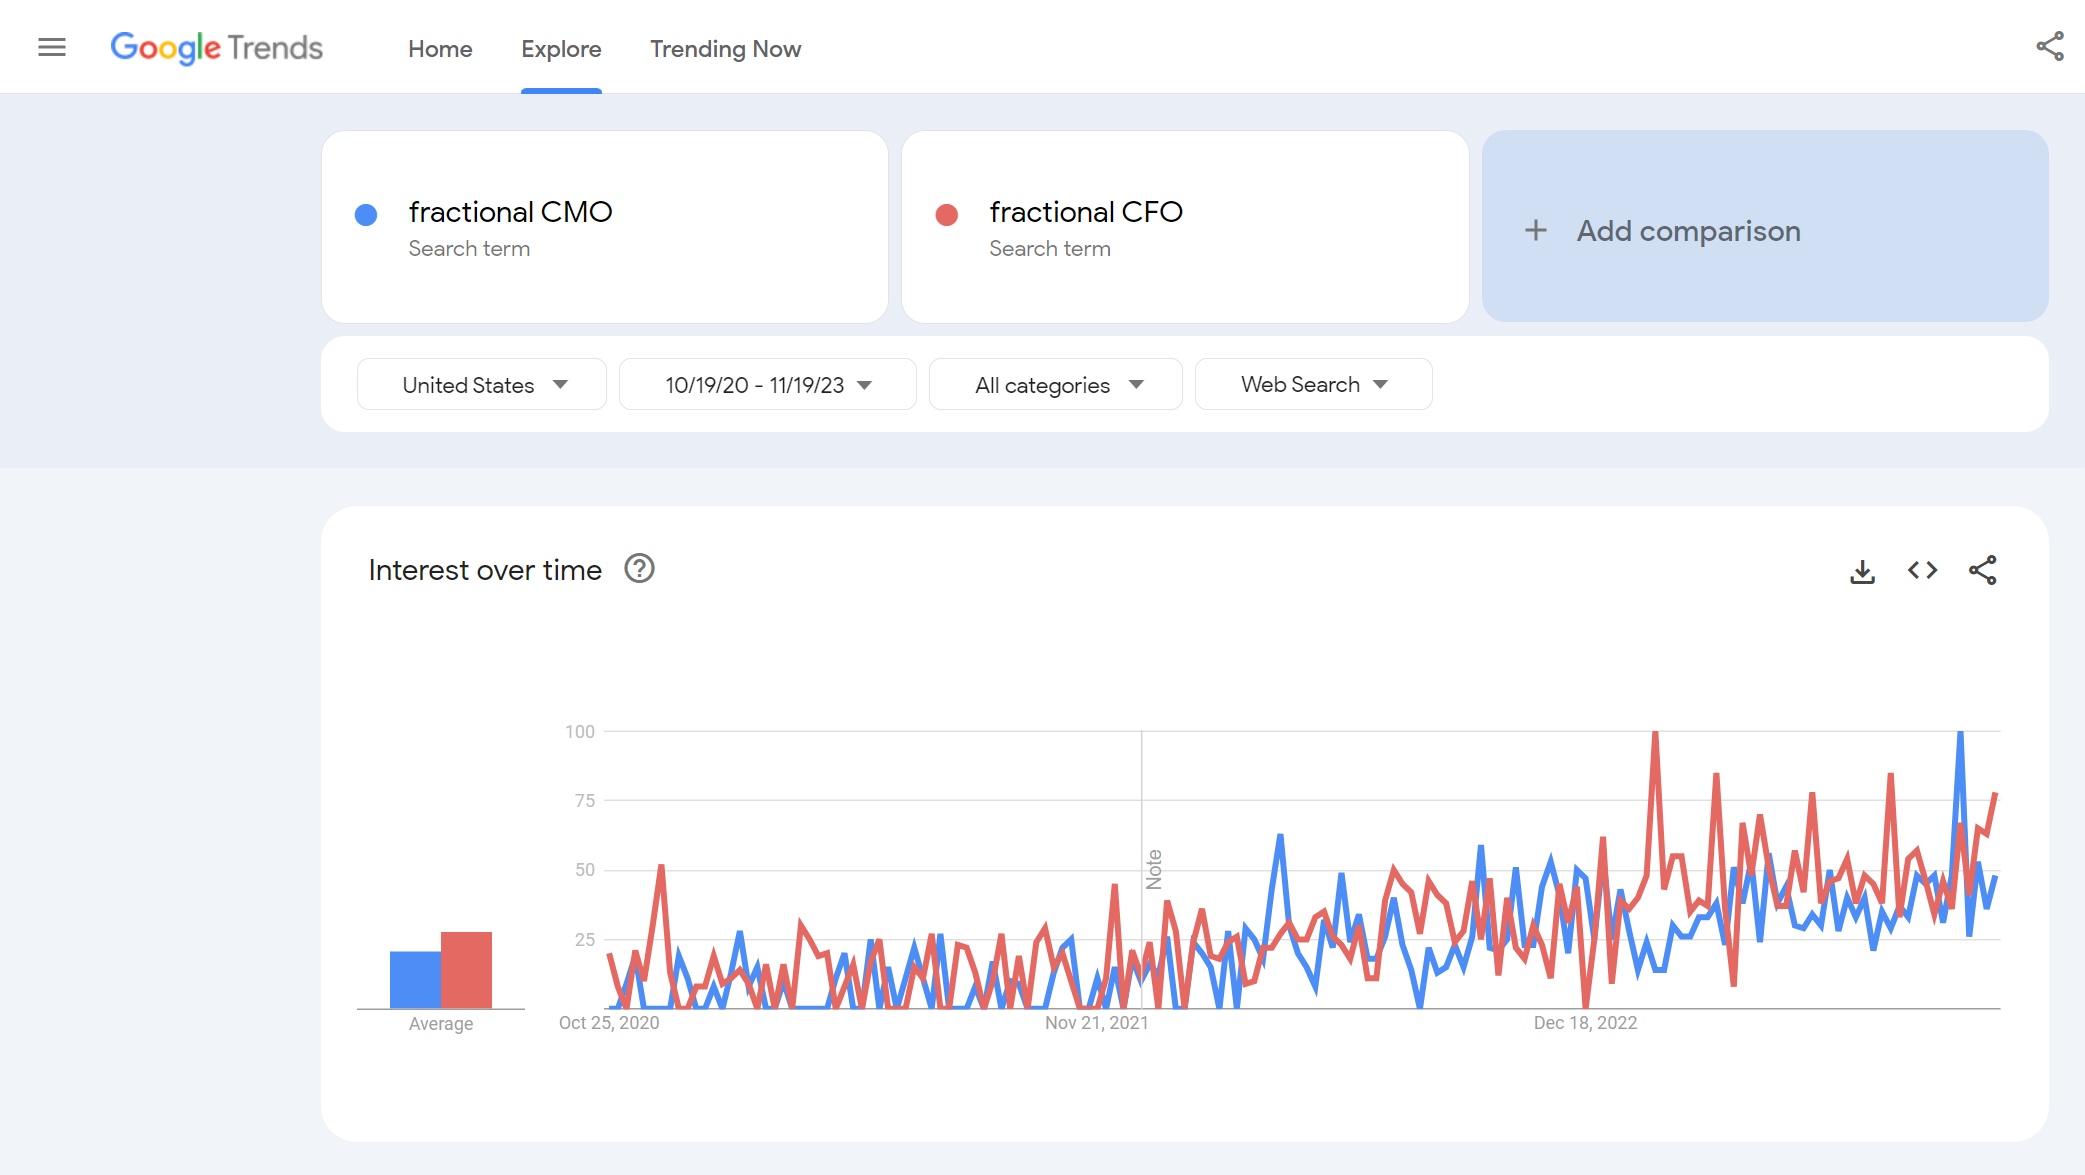 Graph of Google Trends Fractional CMO vs CFO, on the rise since 2021